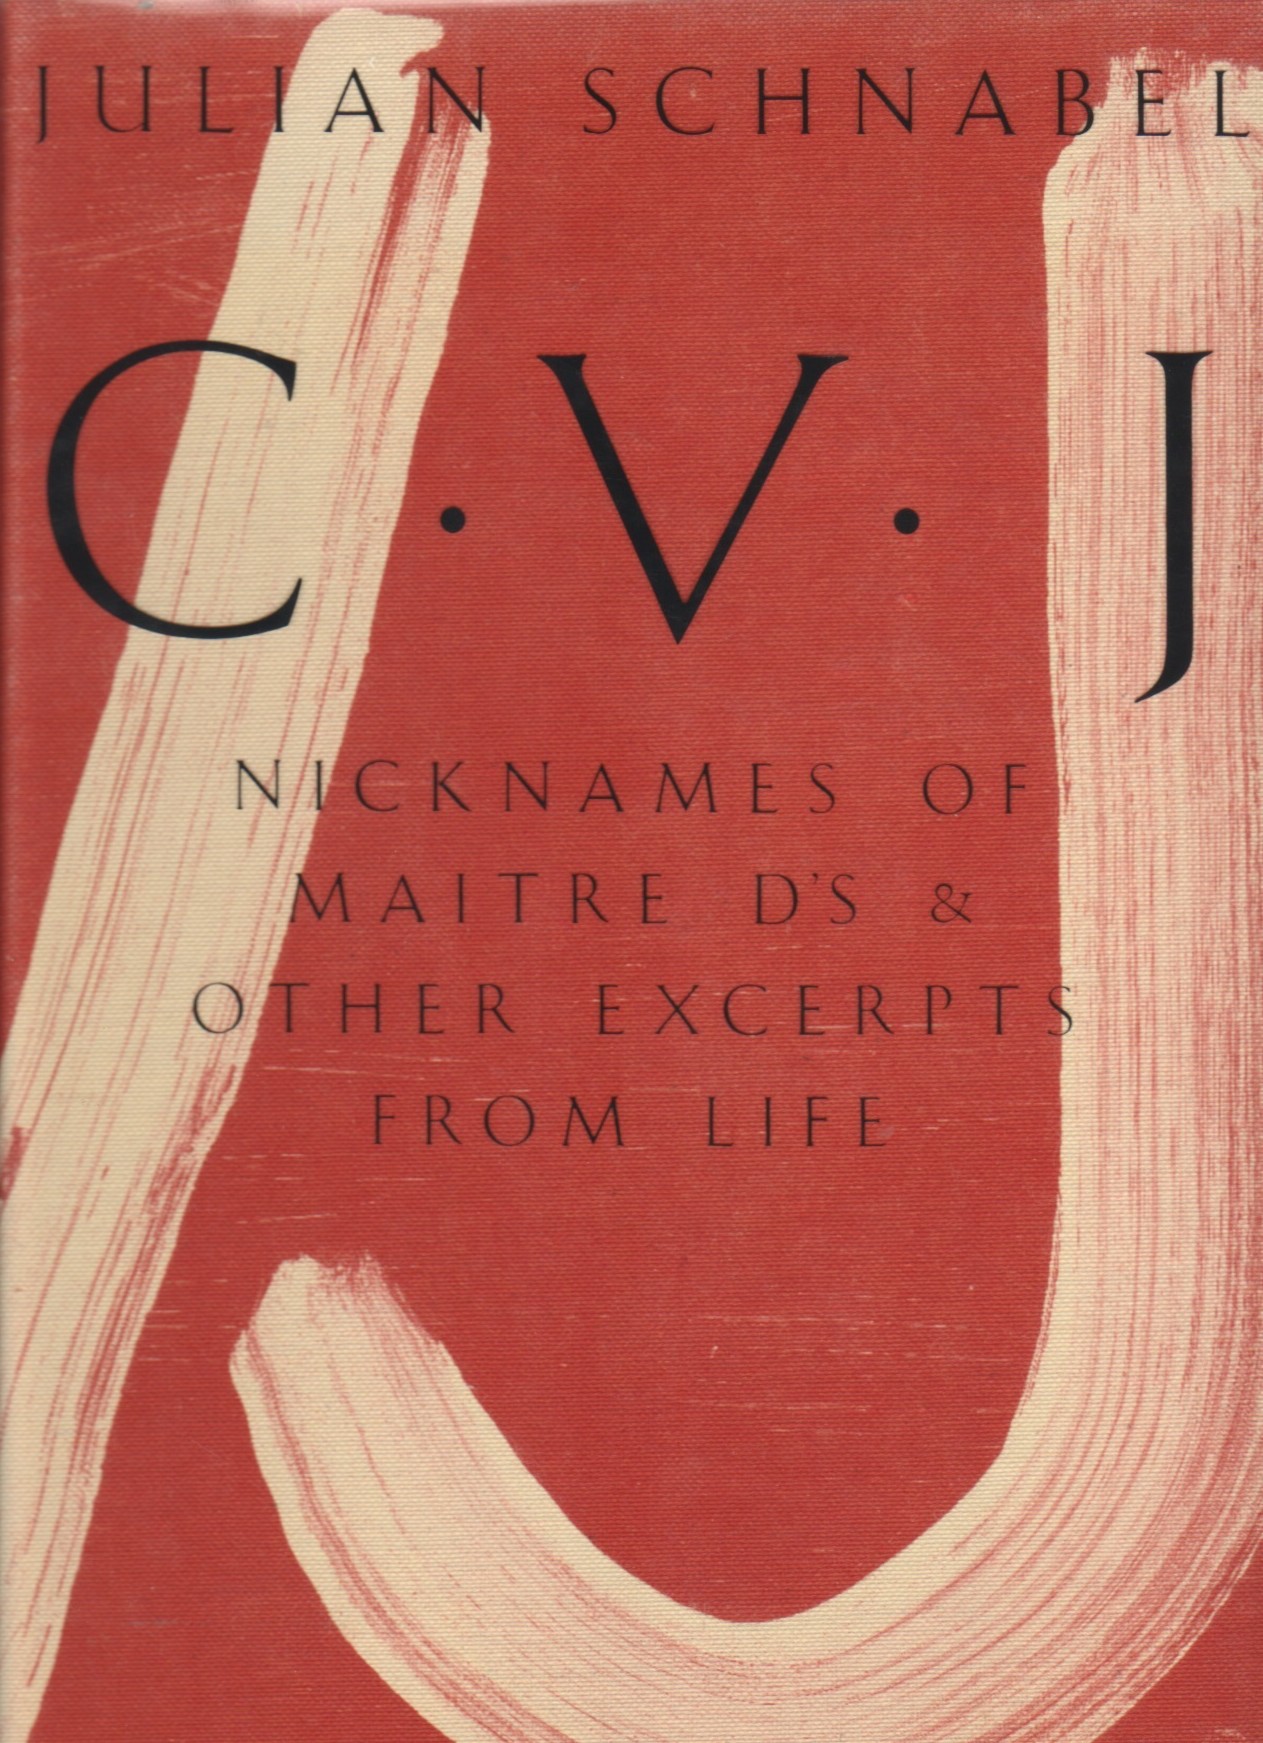 (SCHNABEL, JULIAN). Schnabel, Julian - JULIAN SCHNABEL: C  V  J - NICKNAMES OF MAITRE D'S & OTHER EXCERPTS FROM LIFE - SIGNED PRESENTATION COPY